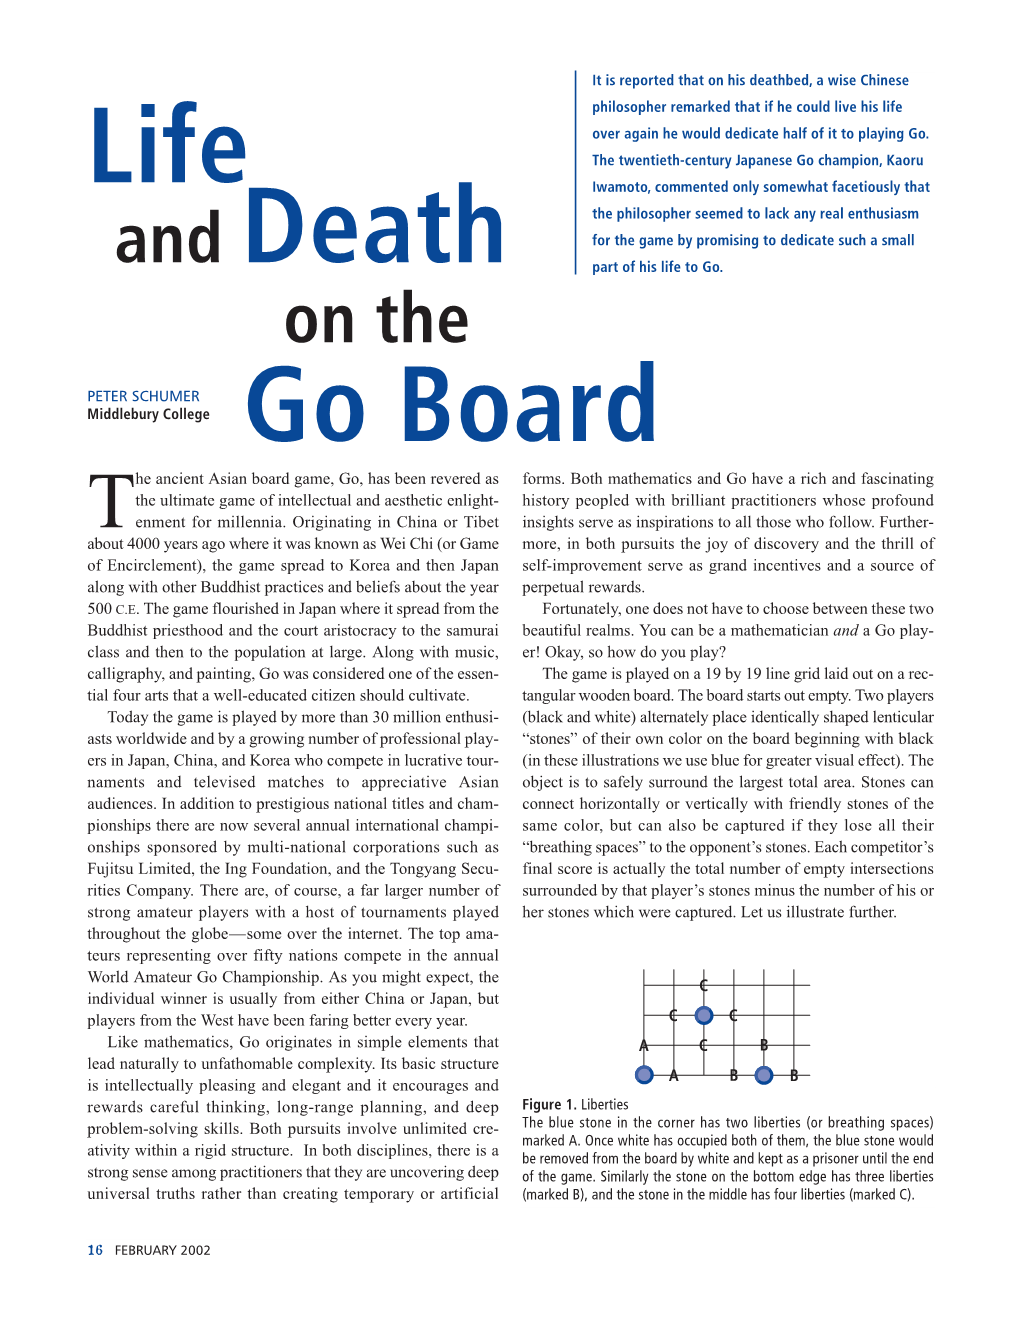 Life and Death on the Go Board